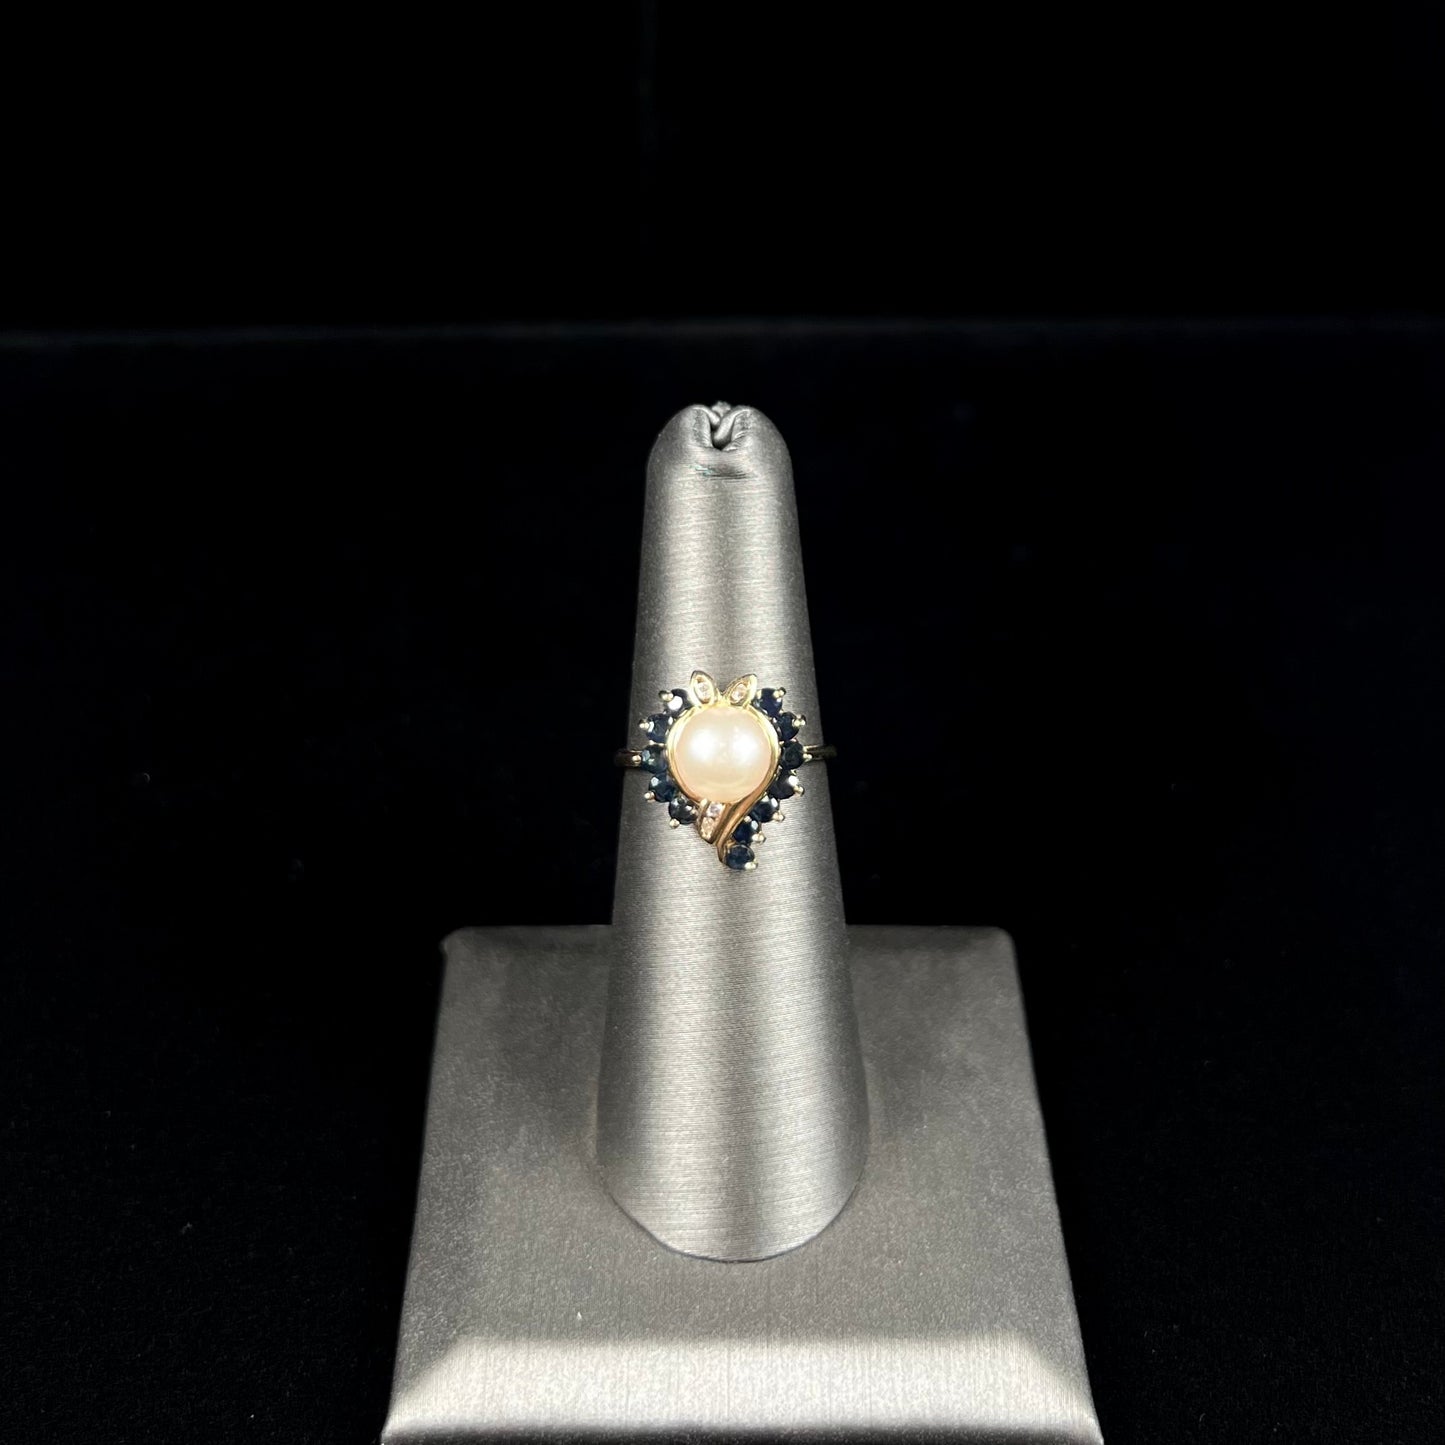 A yellow gold, heart shaped ring set with a freshwater pearl surrounded by blue sapphire and diamond accent stones.